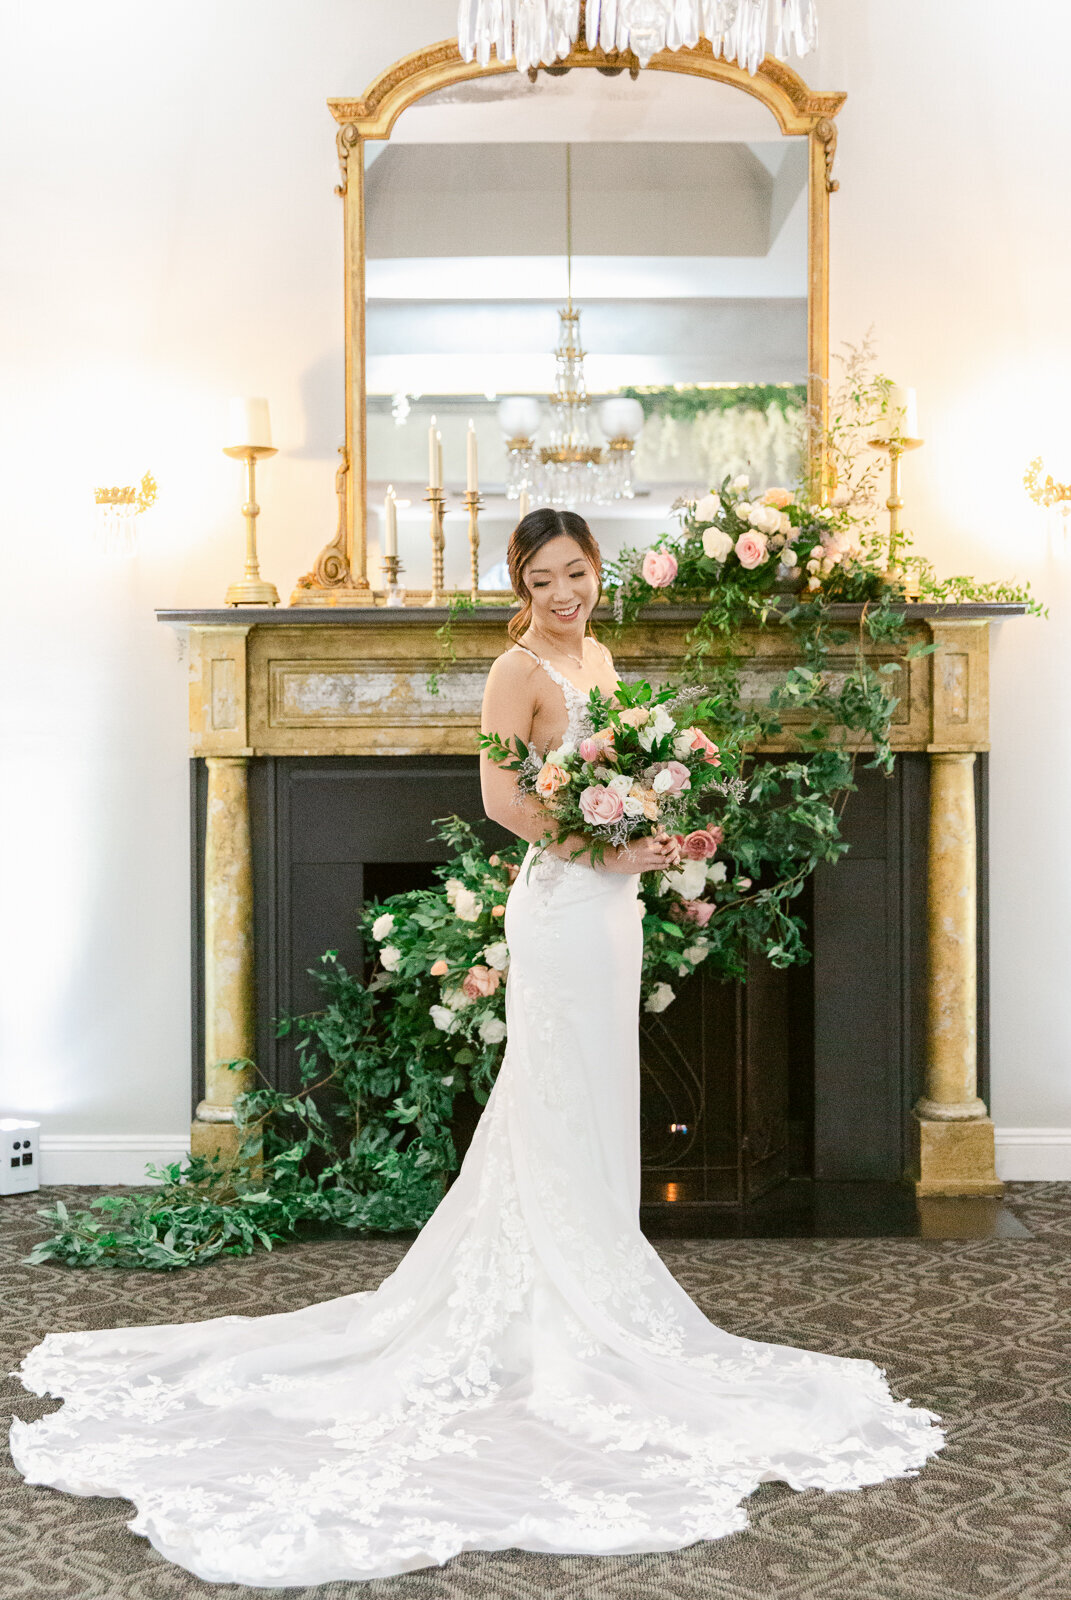 Bride taking portraits in front of the fireplace at Ceresville Mansion in Frederick, Maryland. Captured by Bethany Aubre Photography.